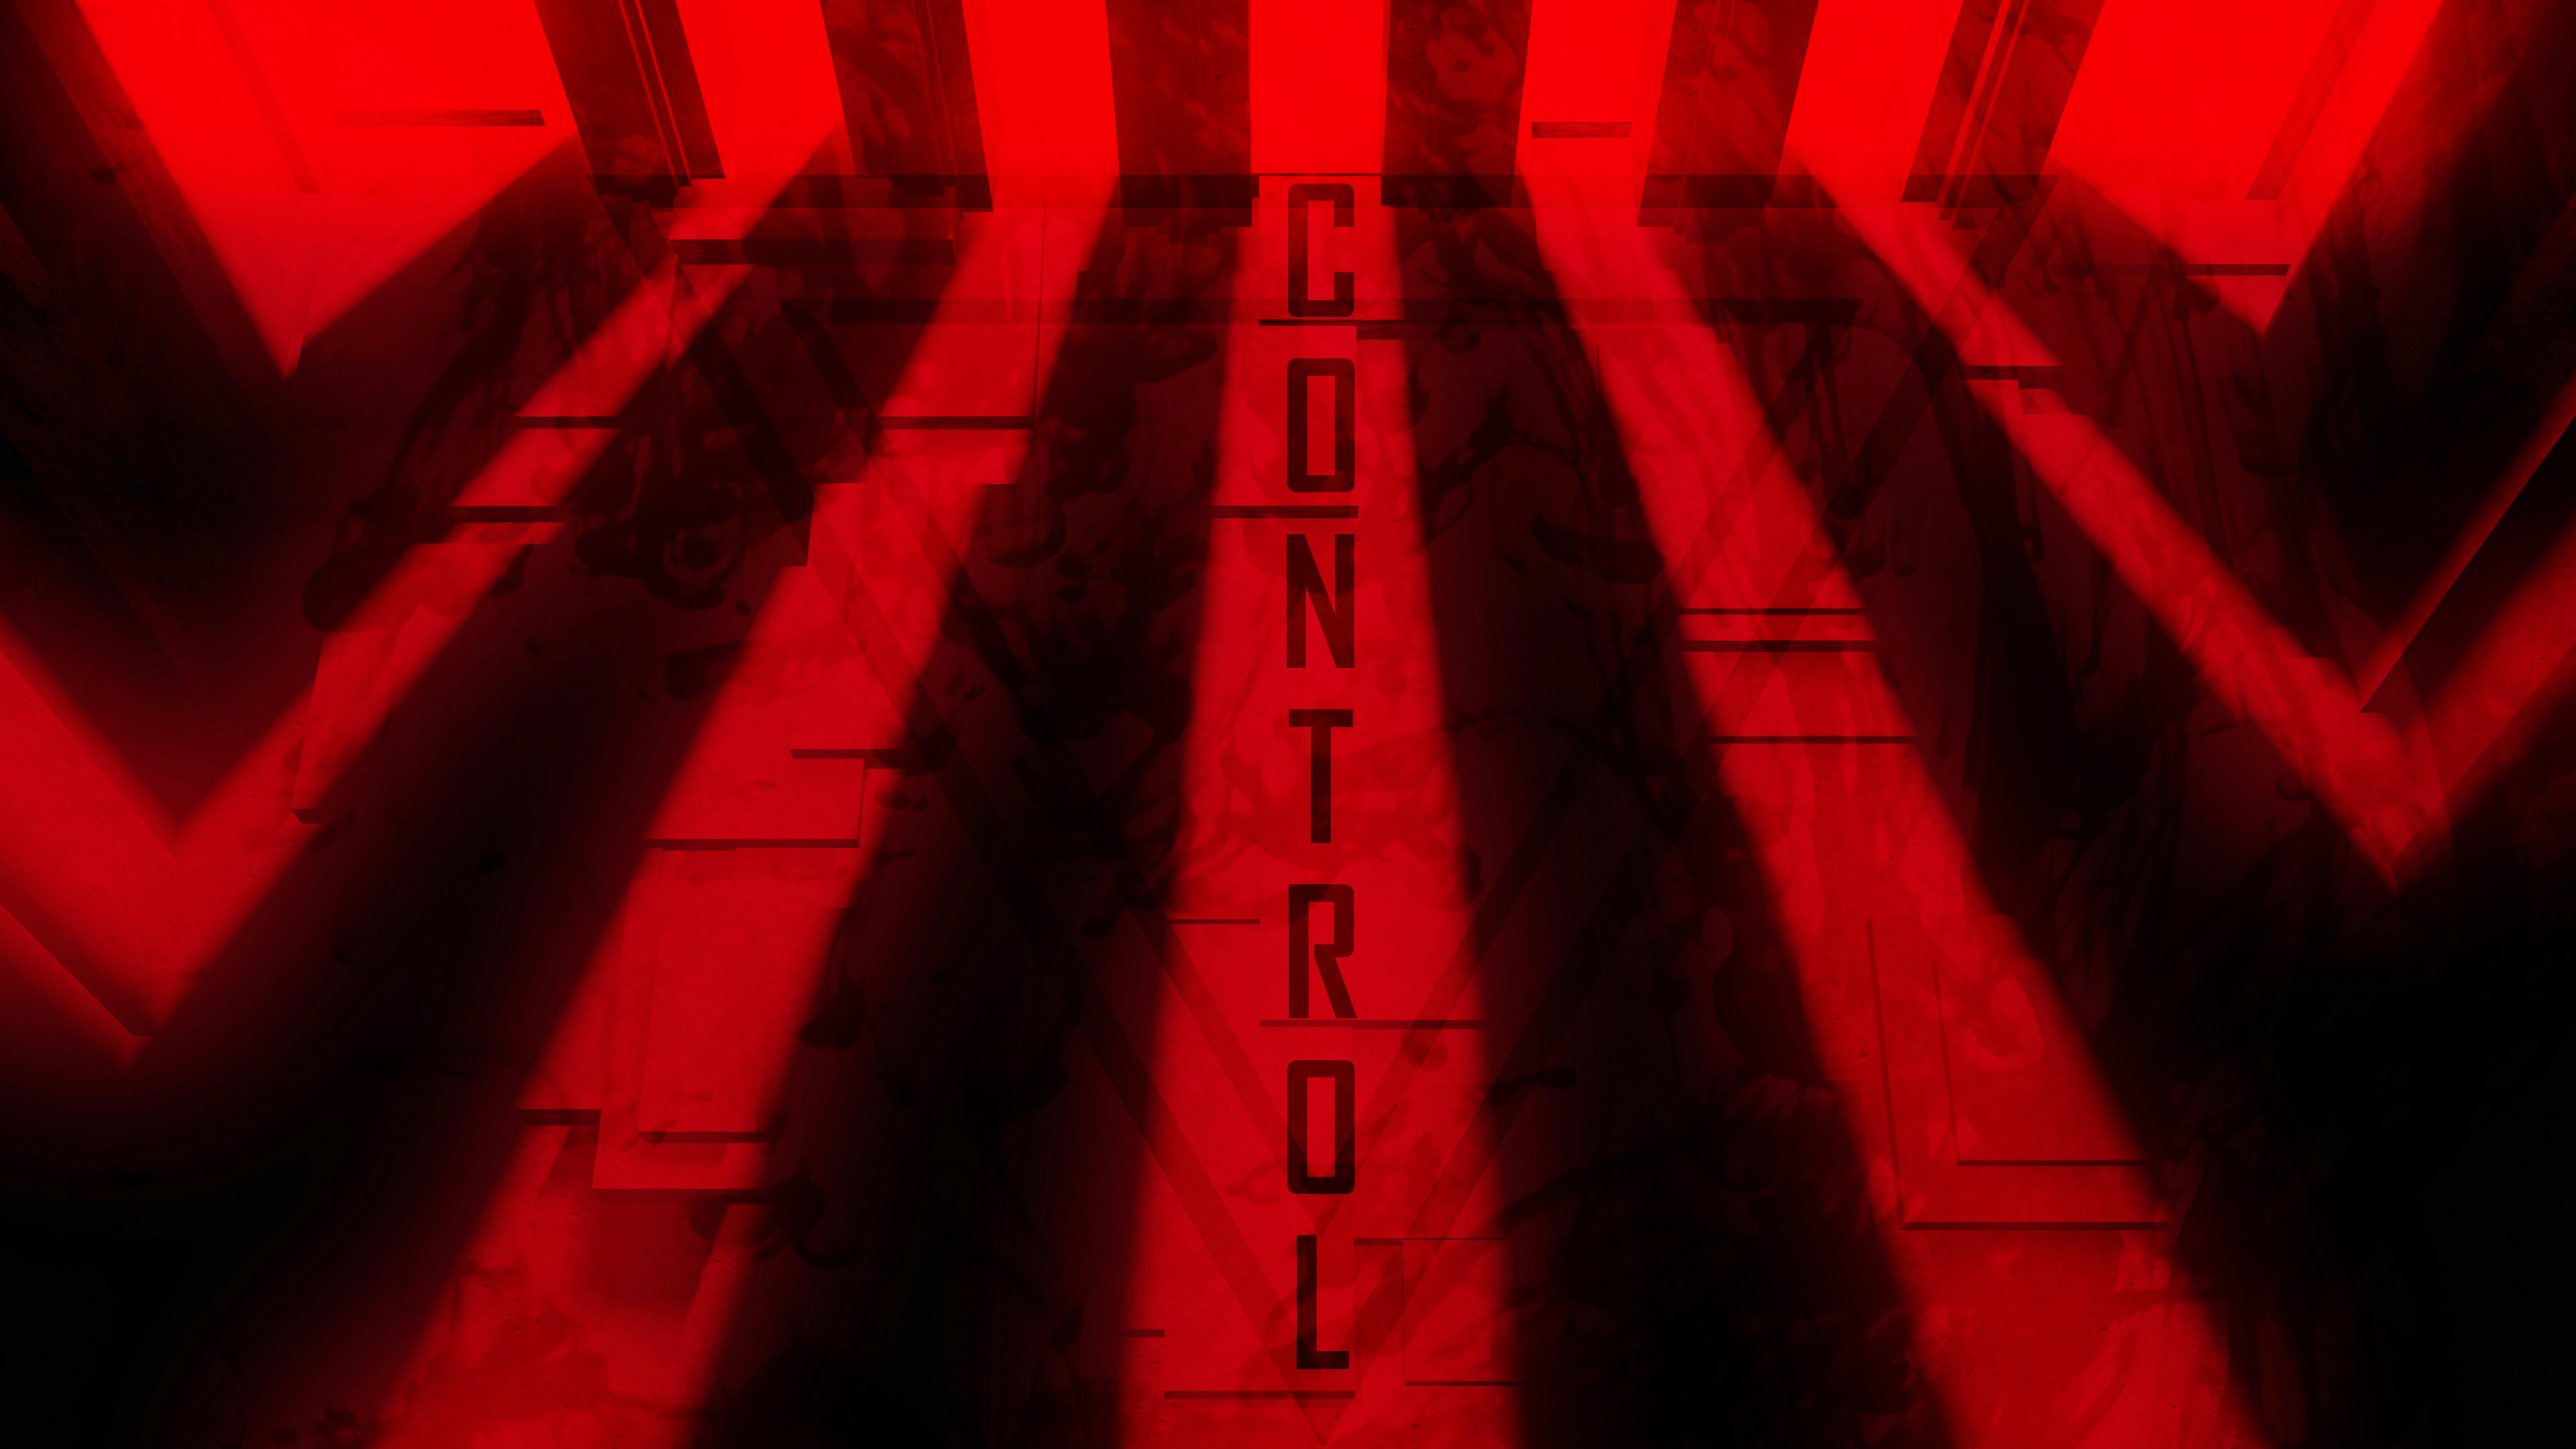 control, control (video game), video game